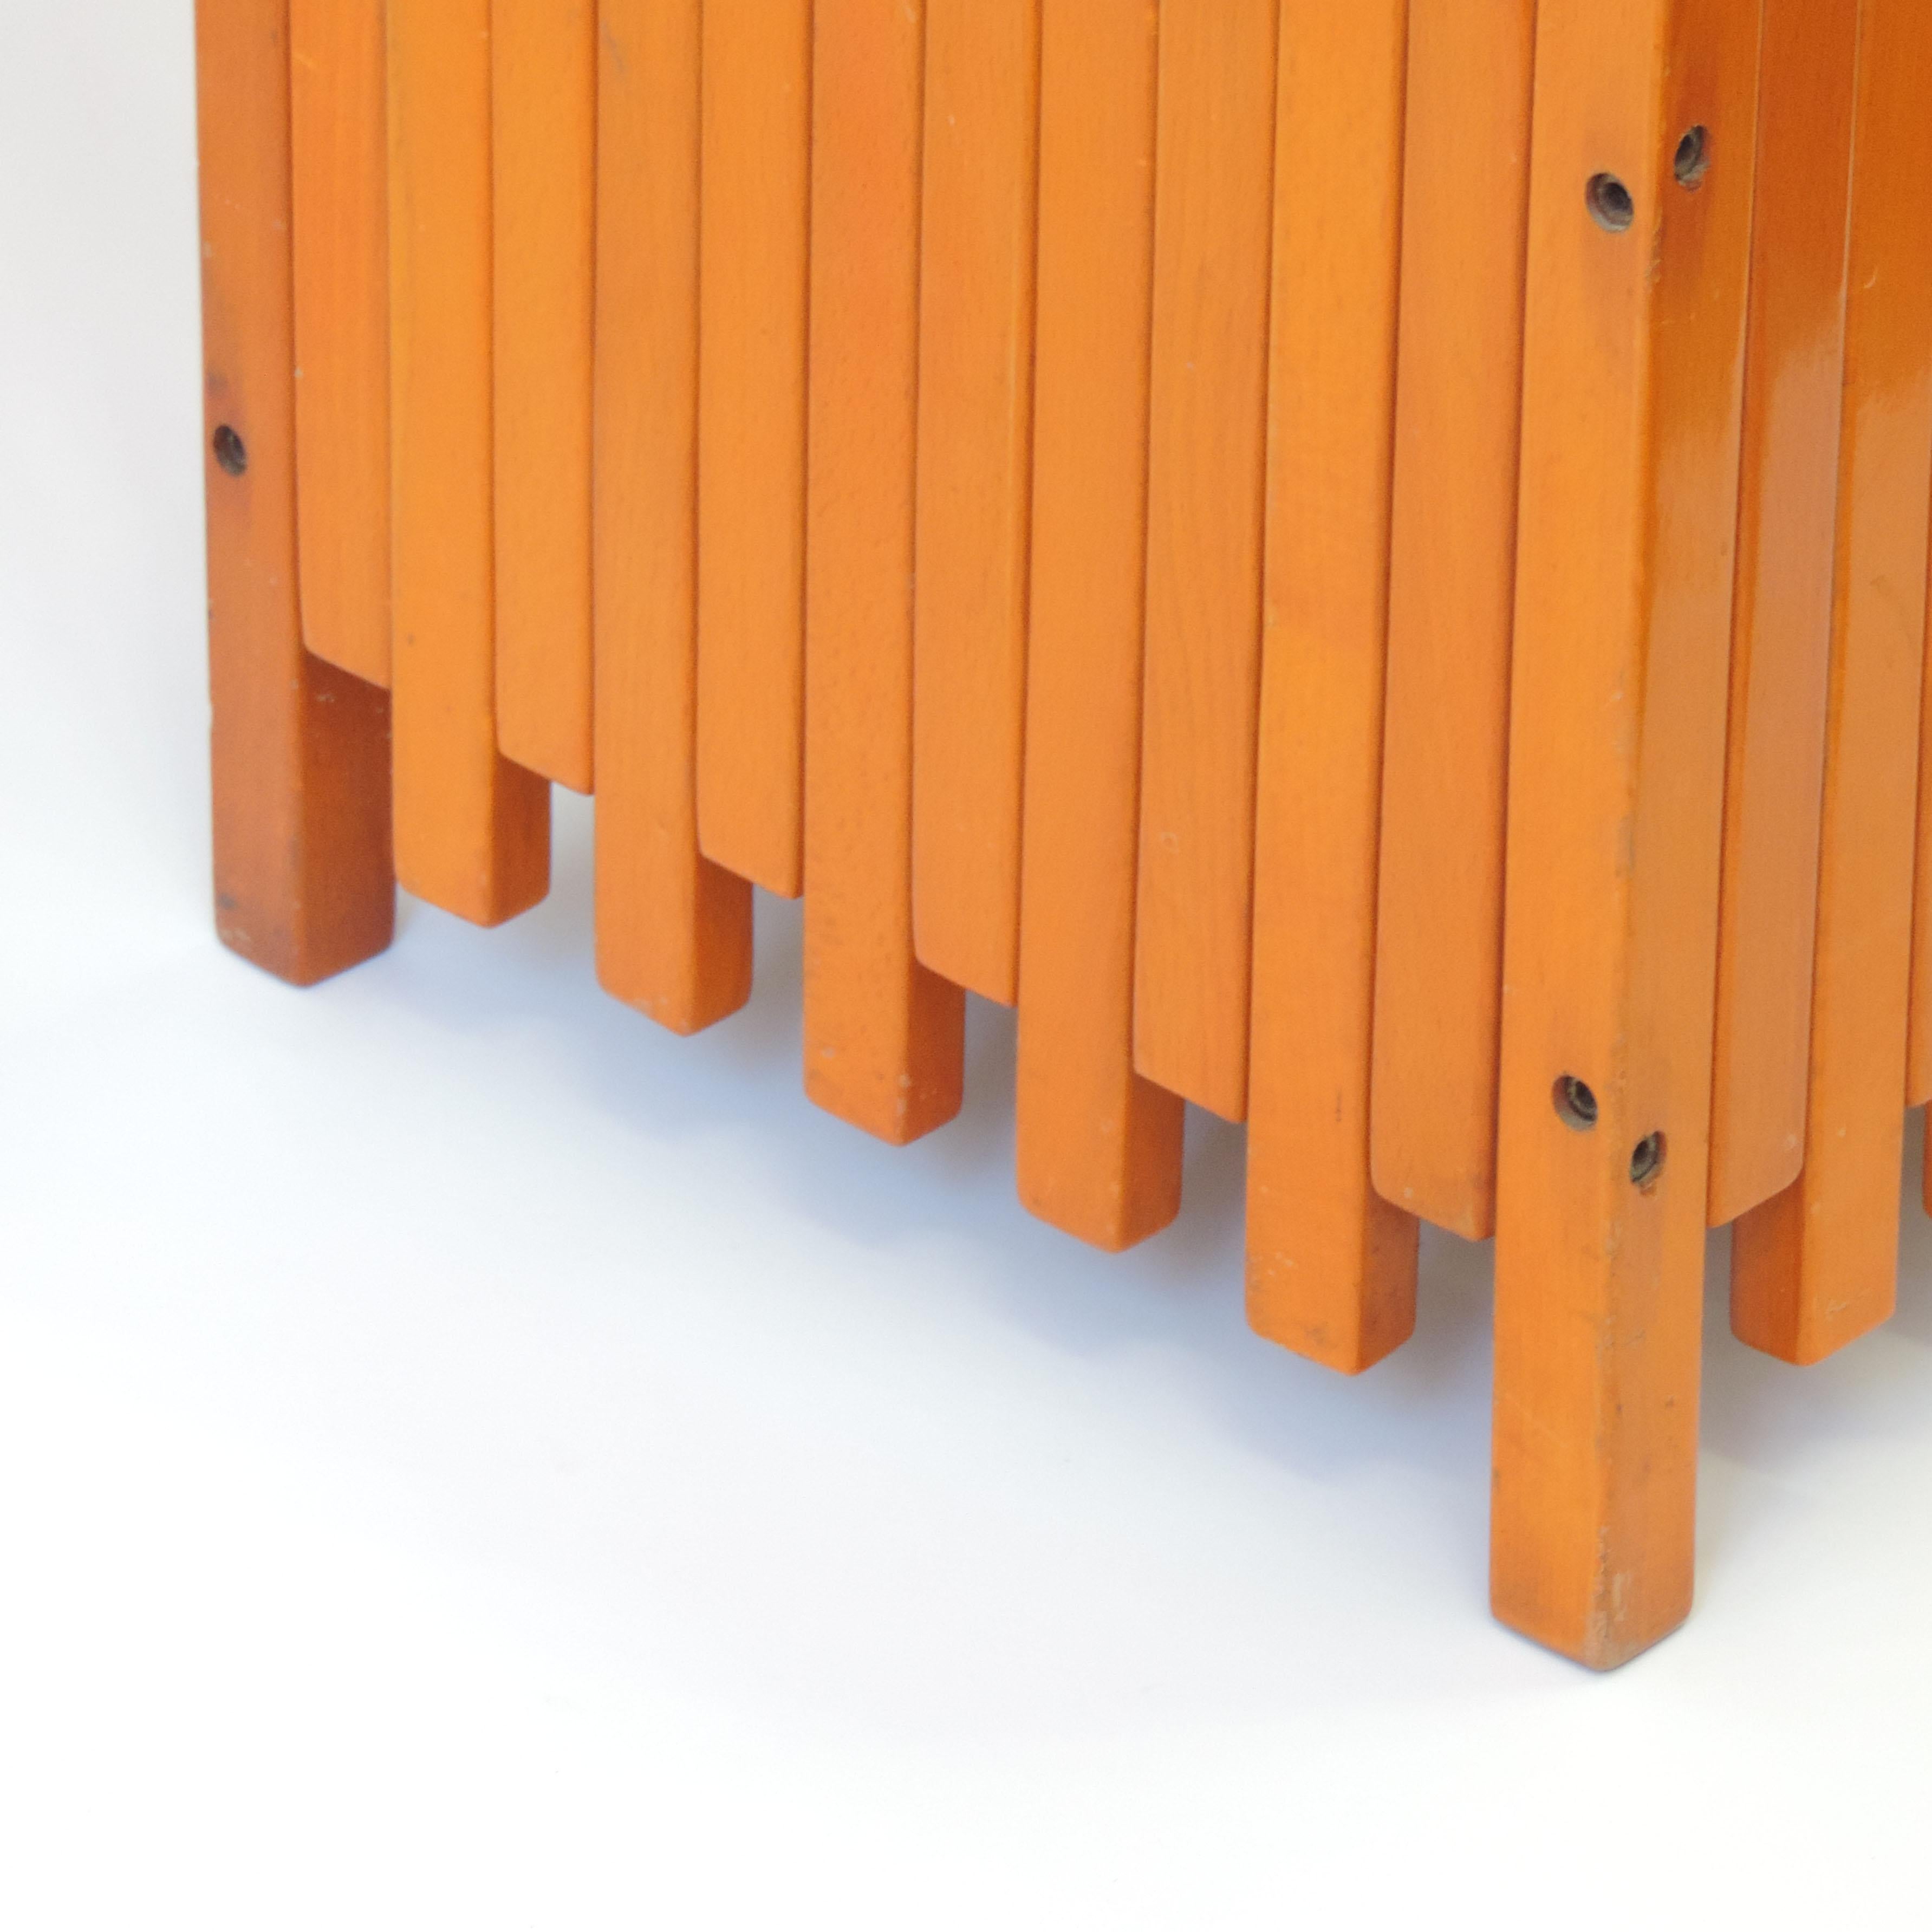 Mid-Century Modern Ettore Sottsass Orange Stained Wood Planter for Poltronova, Italy, 1961